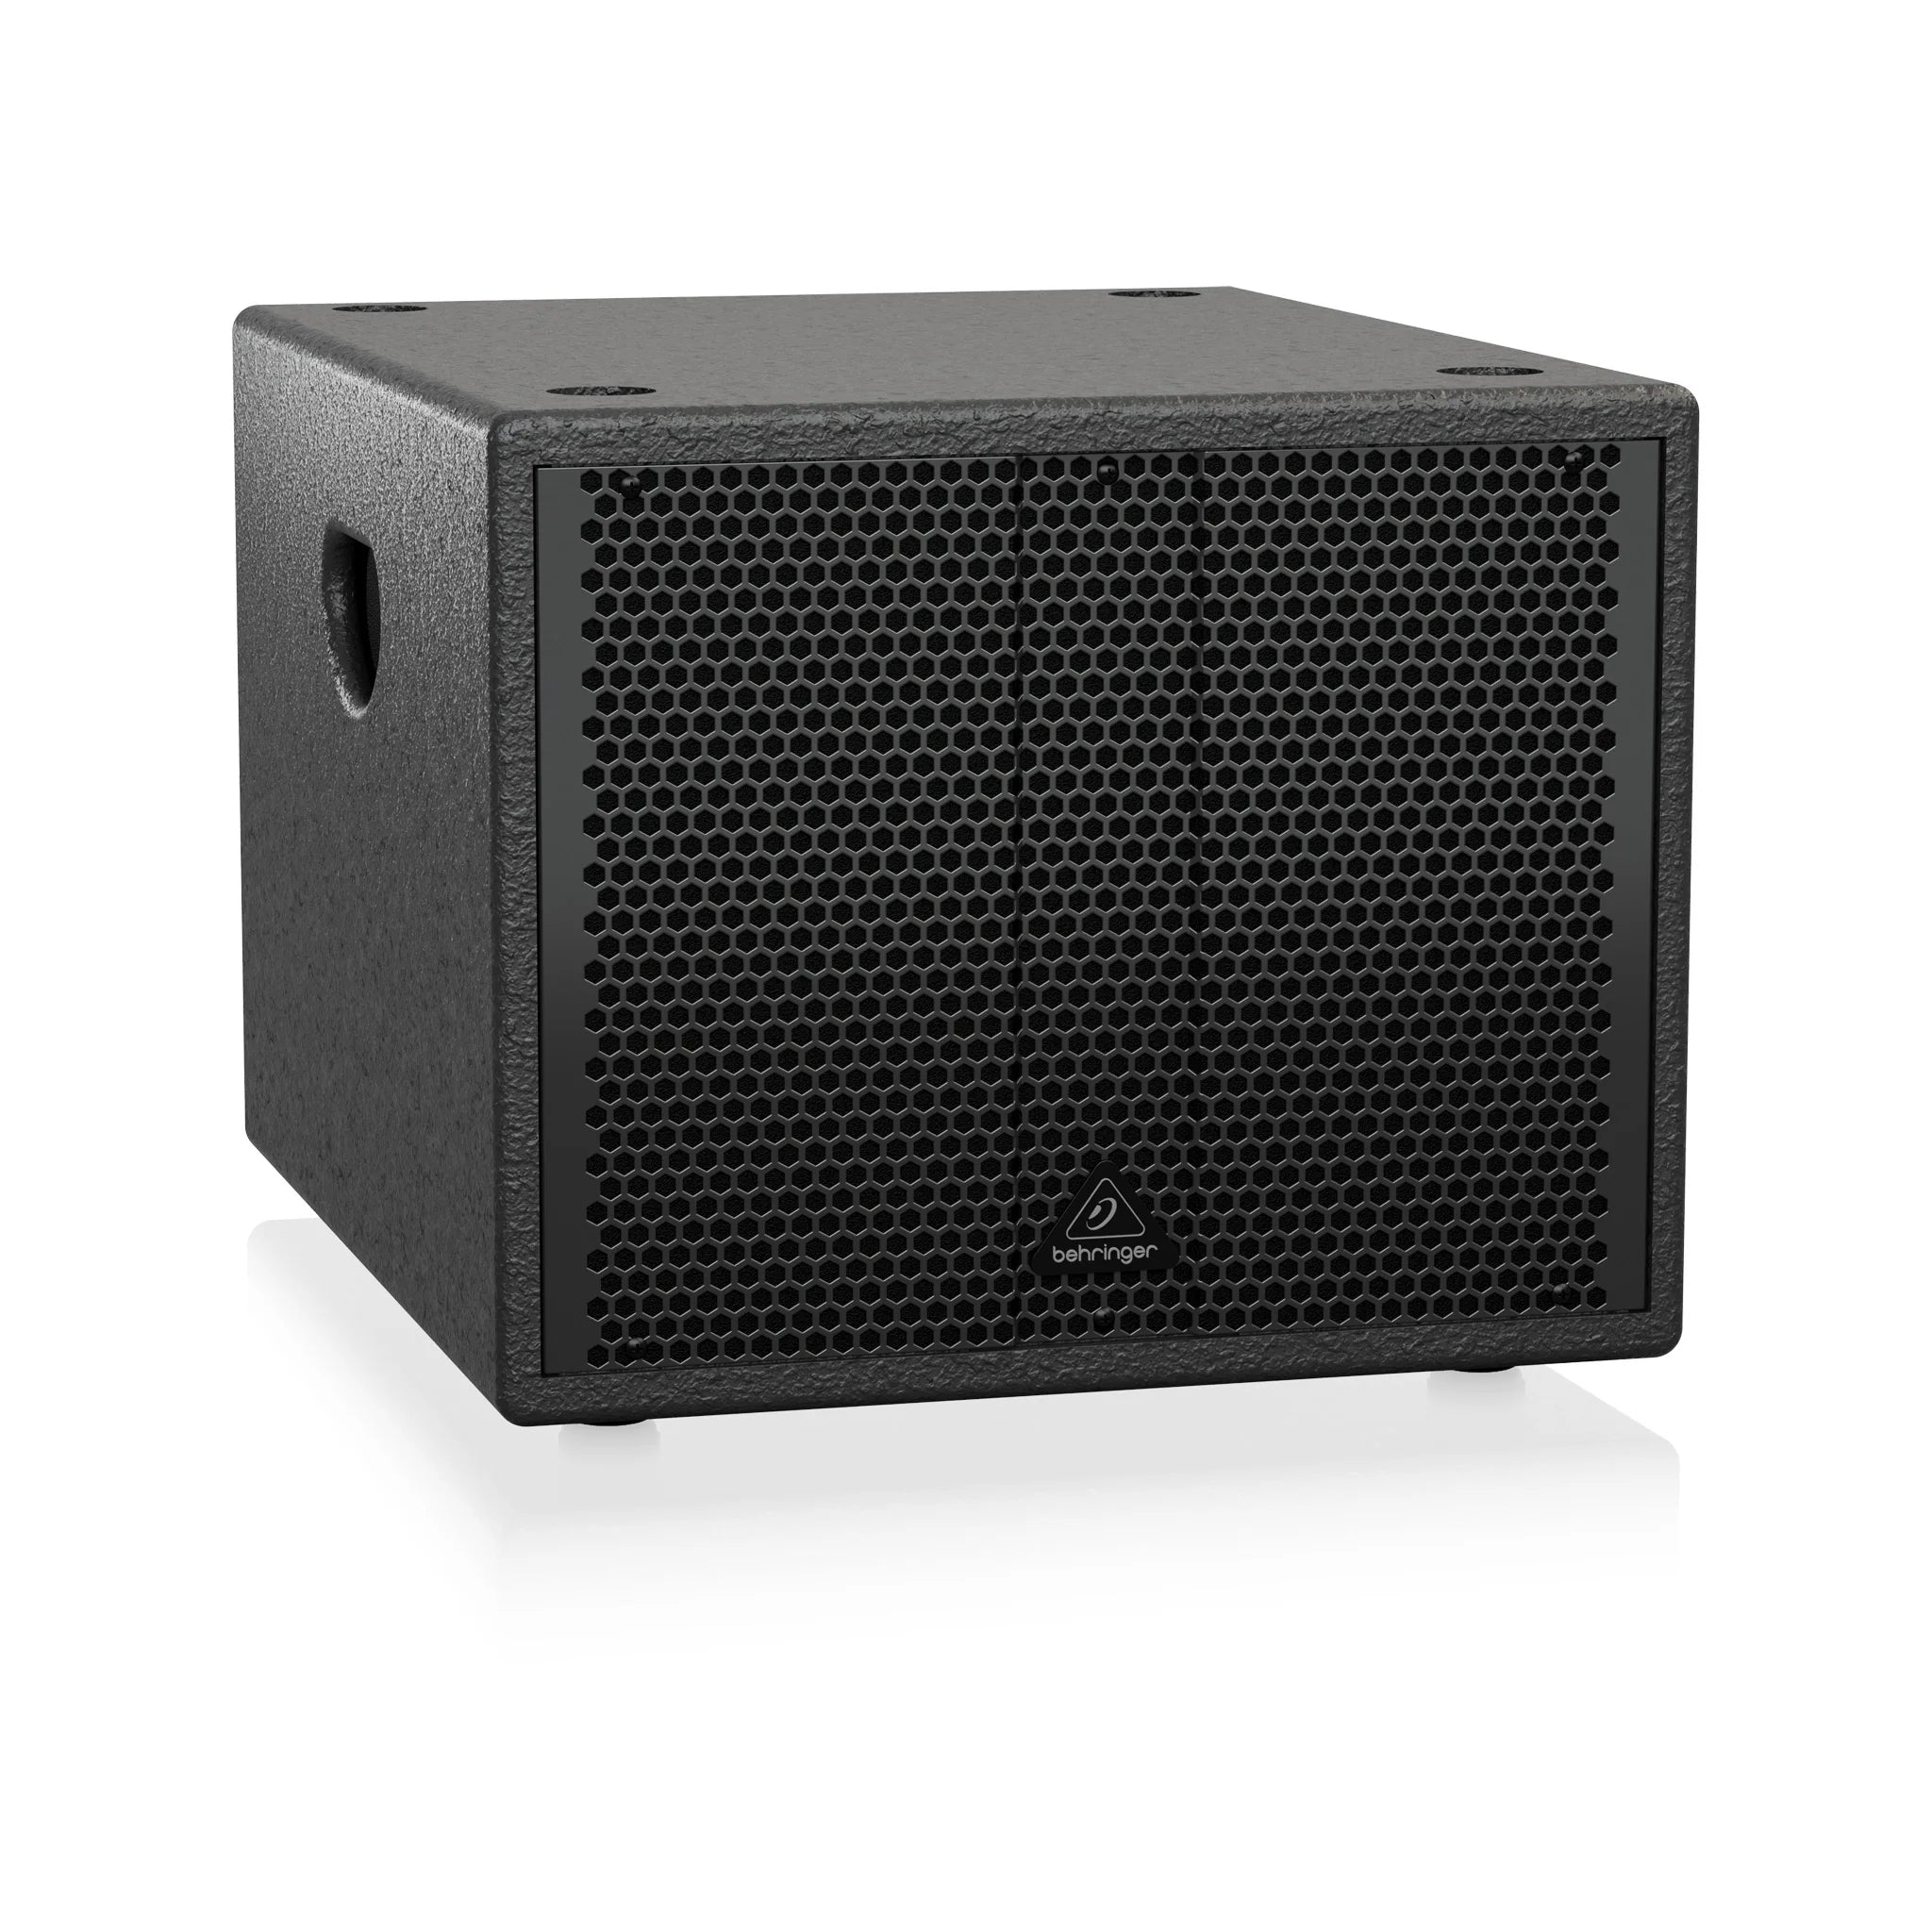 Behringer SAT 1008 SUBA Active 360W 8" PA Subwoofer with Built-In Stereo Crossover